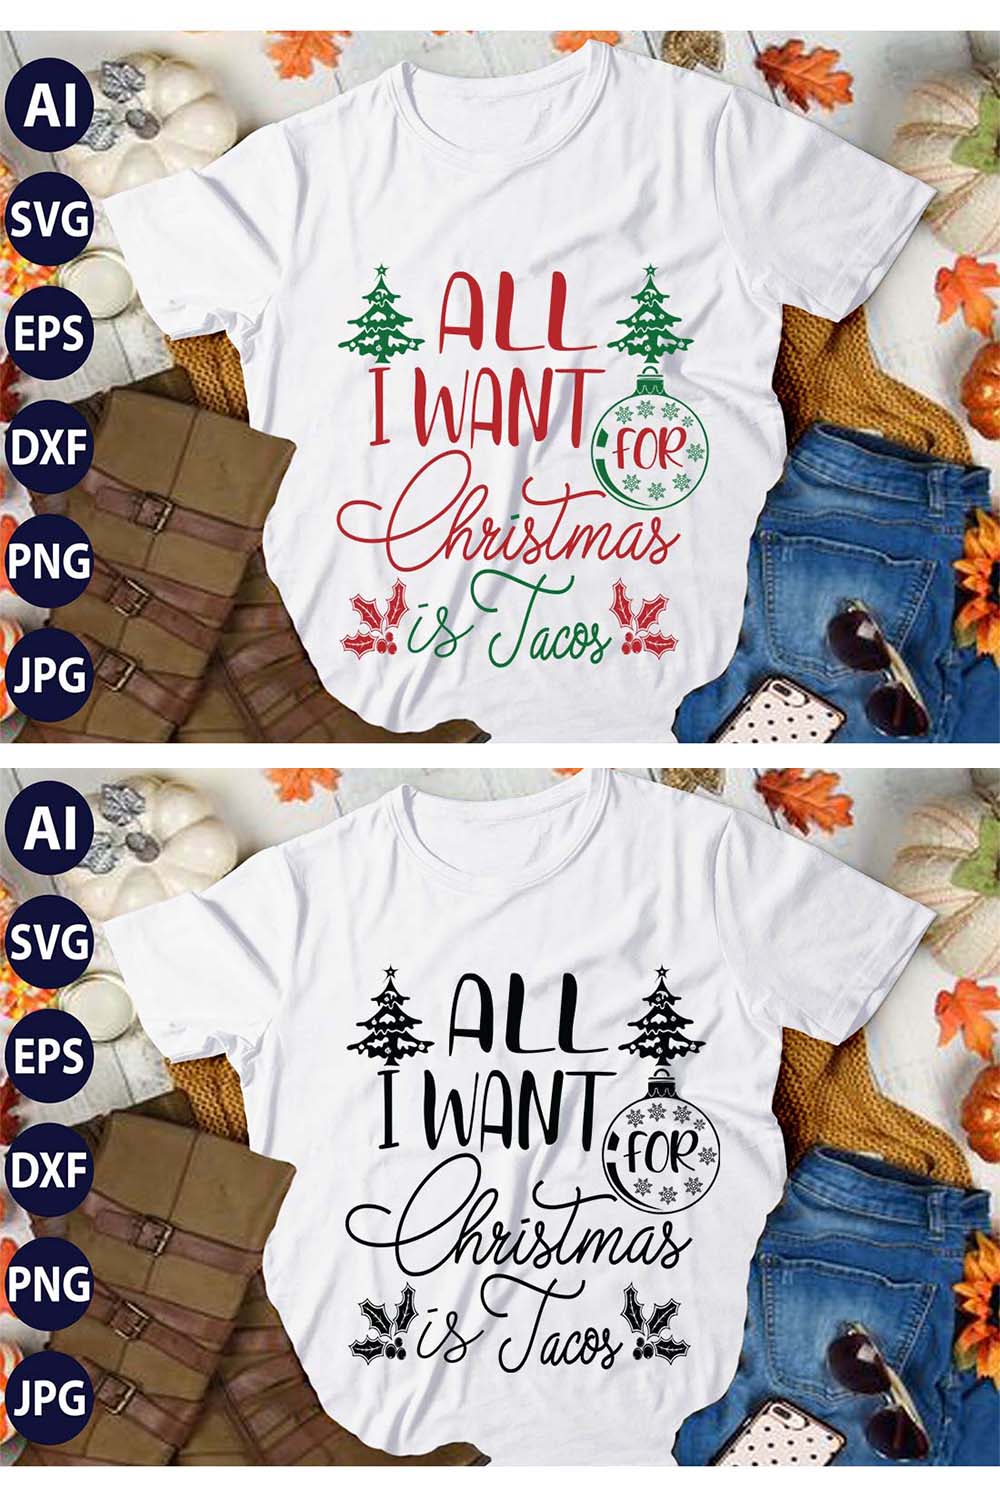 All I Want for Christmas Is Taco, SVG T-Shirt Design |Christmas Retro It's All About Jesus Typography Tshirt Design | Ai, Svg, Eps, Dxf, Jpeg, Png, Instant download T-Shirt | 100% print-ready Digital vector file pinterest preview image.